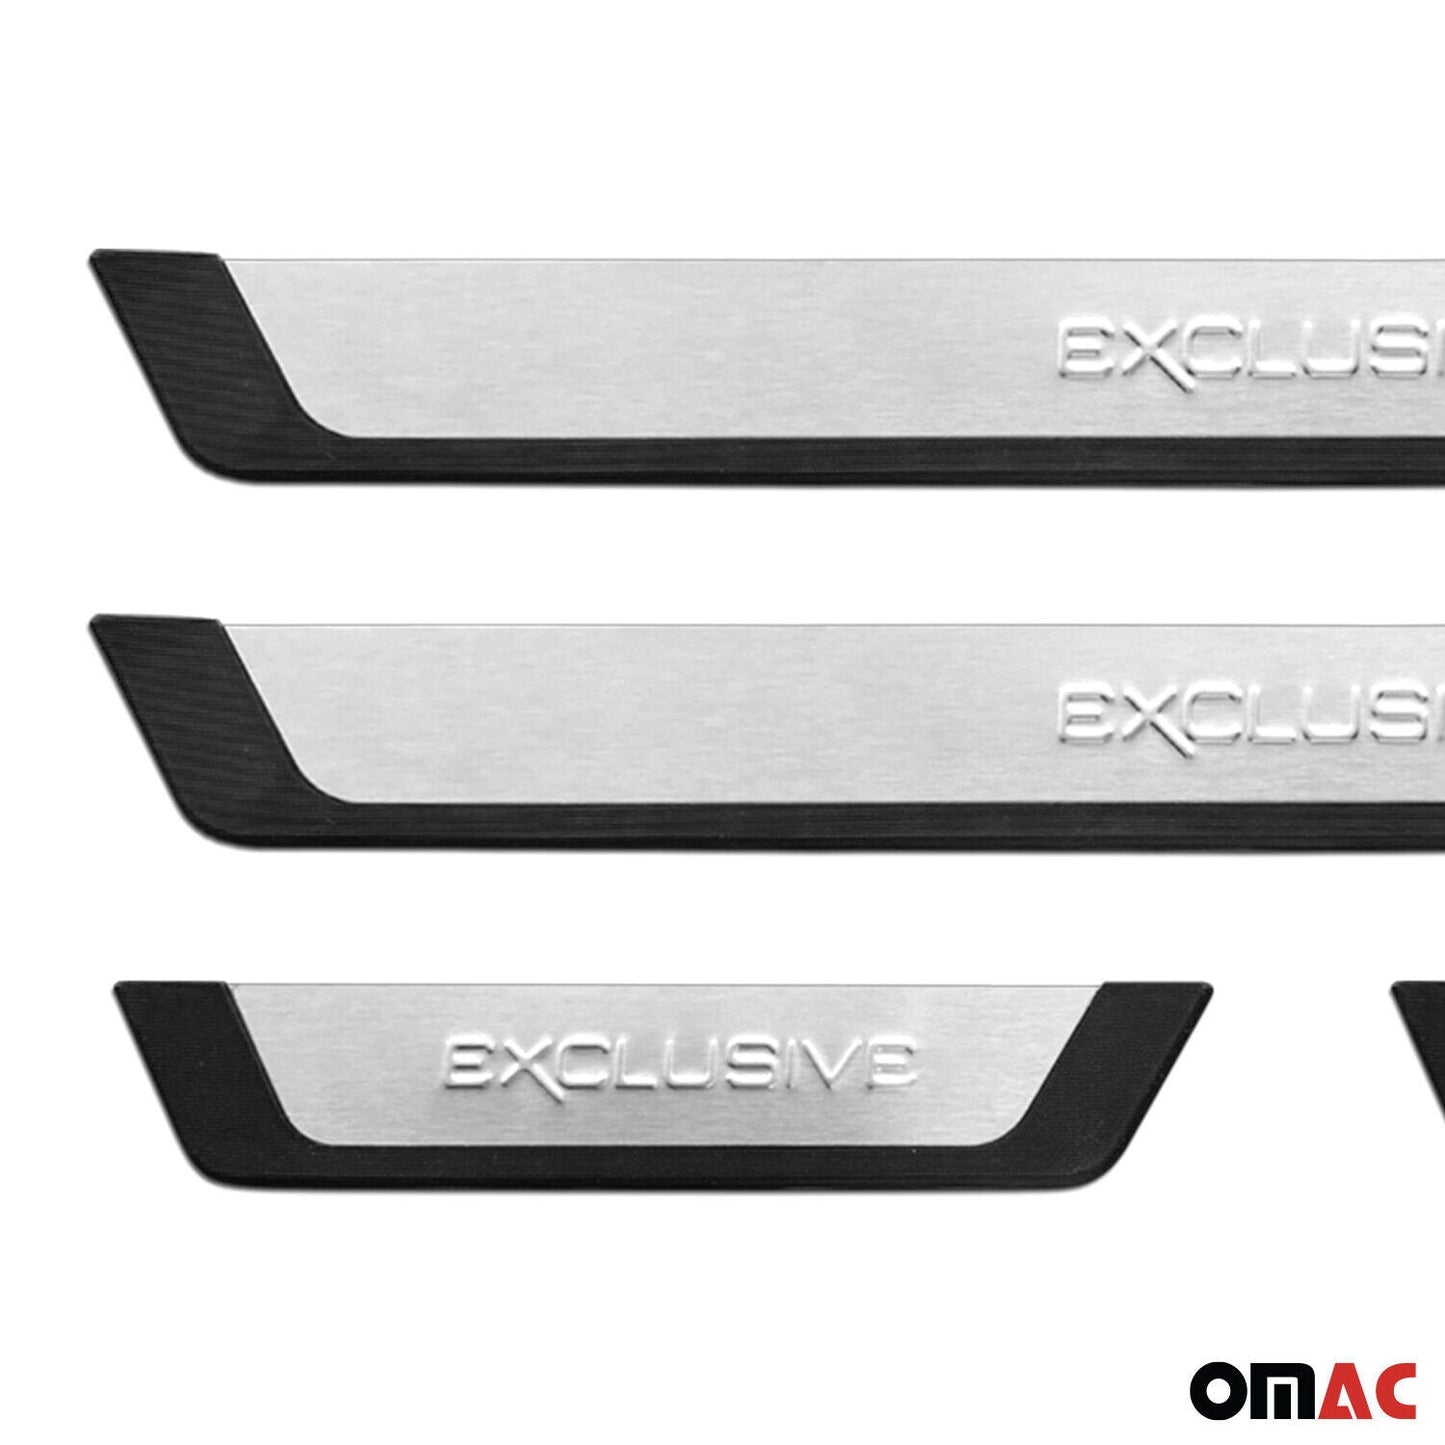 OMAC Door Sill Scuff Plate Scratch for Range Rover 2013-2021 Exclusive Steel 4x 60079696091FX